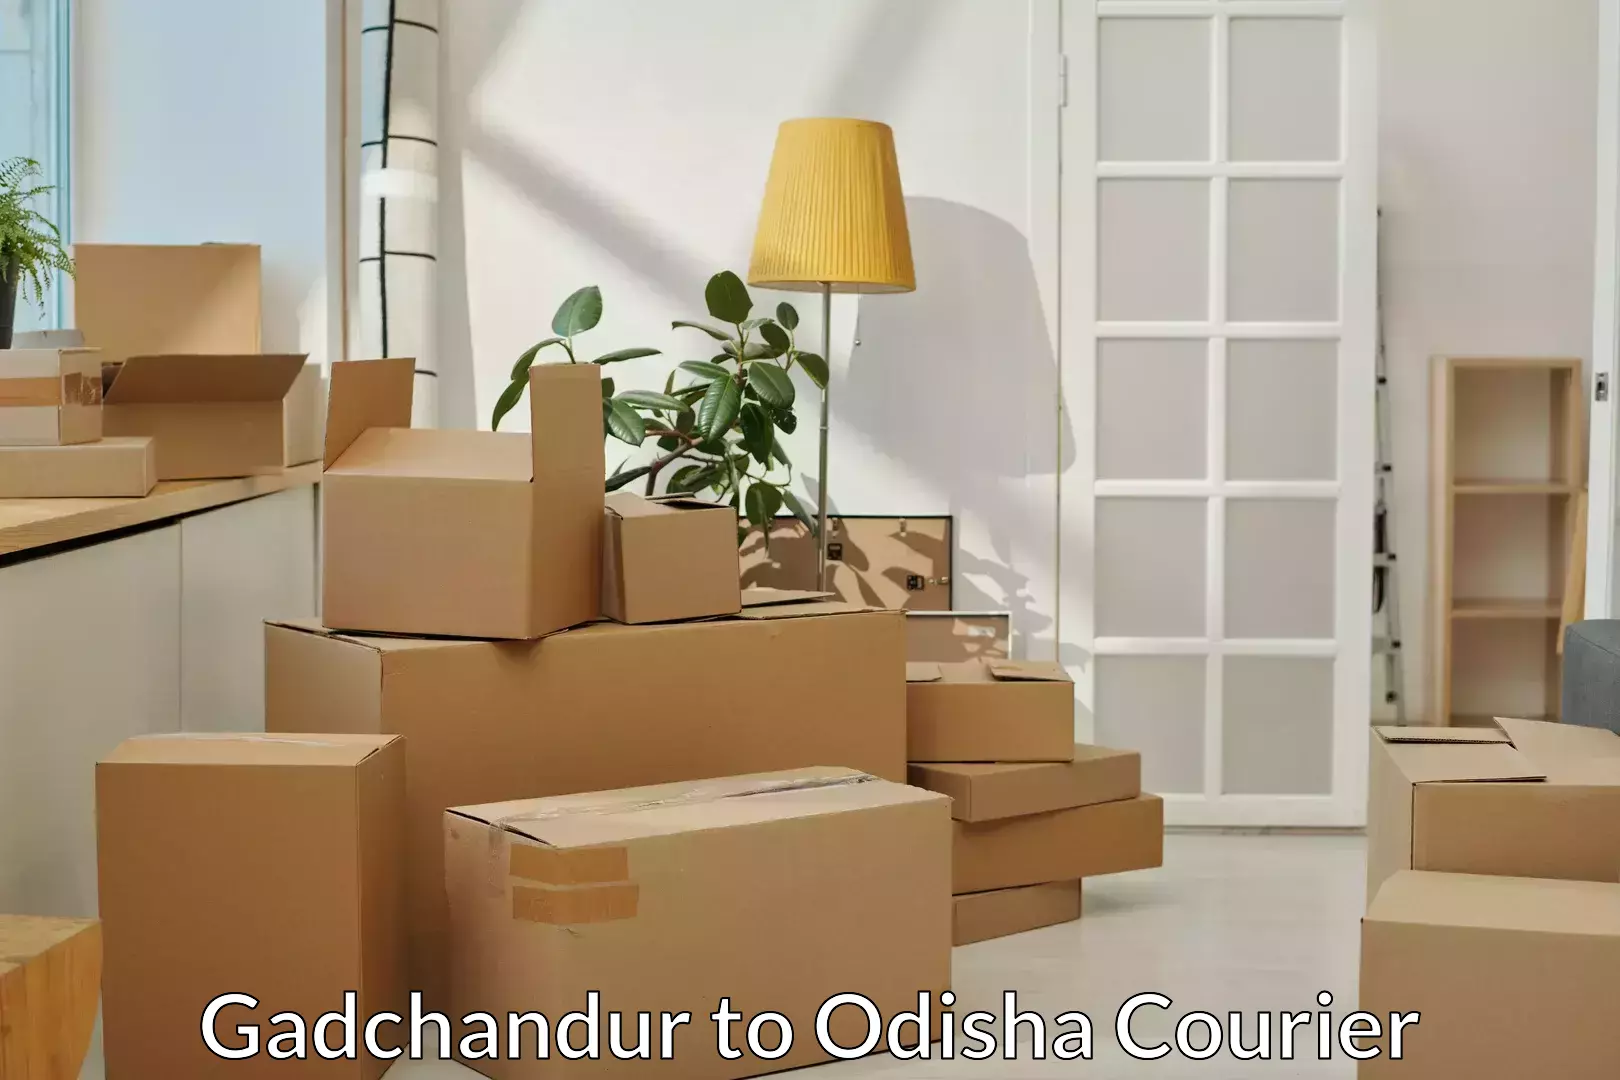 Trusted relocation experts Gadchandur to Gajapati